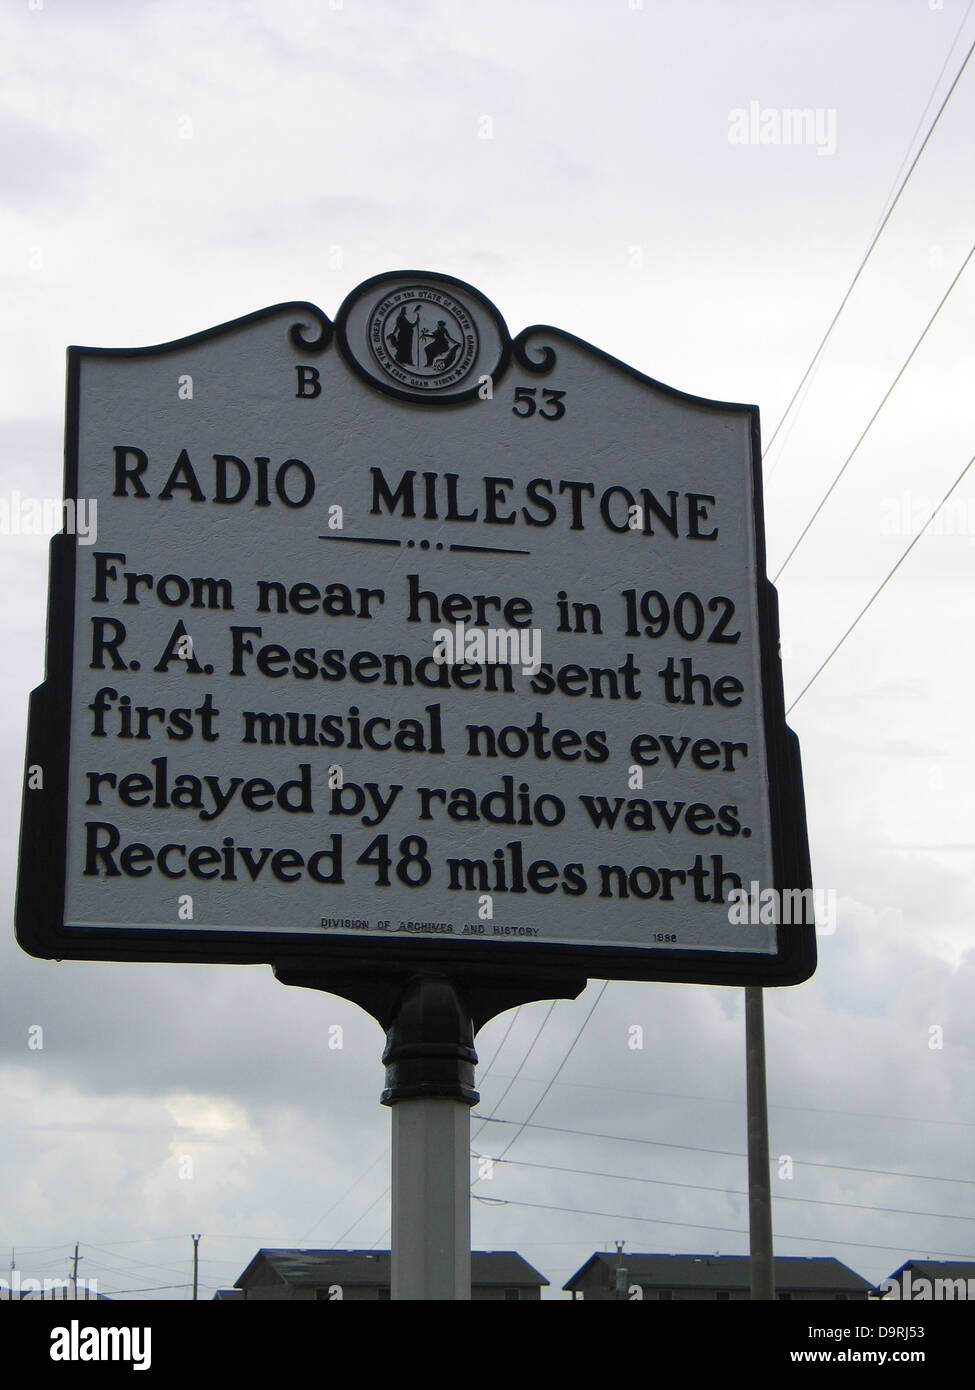 RADIO MILESTONE From near here in 1902 R. A. Fessenden sent the first musical notes ever relayed by radio waves. Received 48 miles north. Division of Archives and History, 1988 Stock Photo